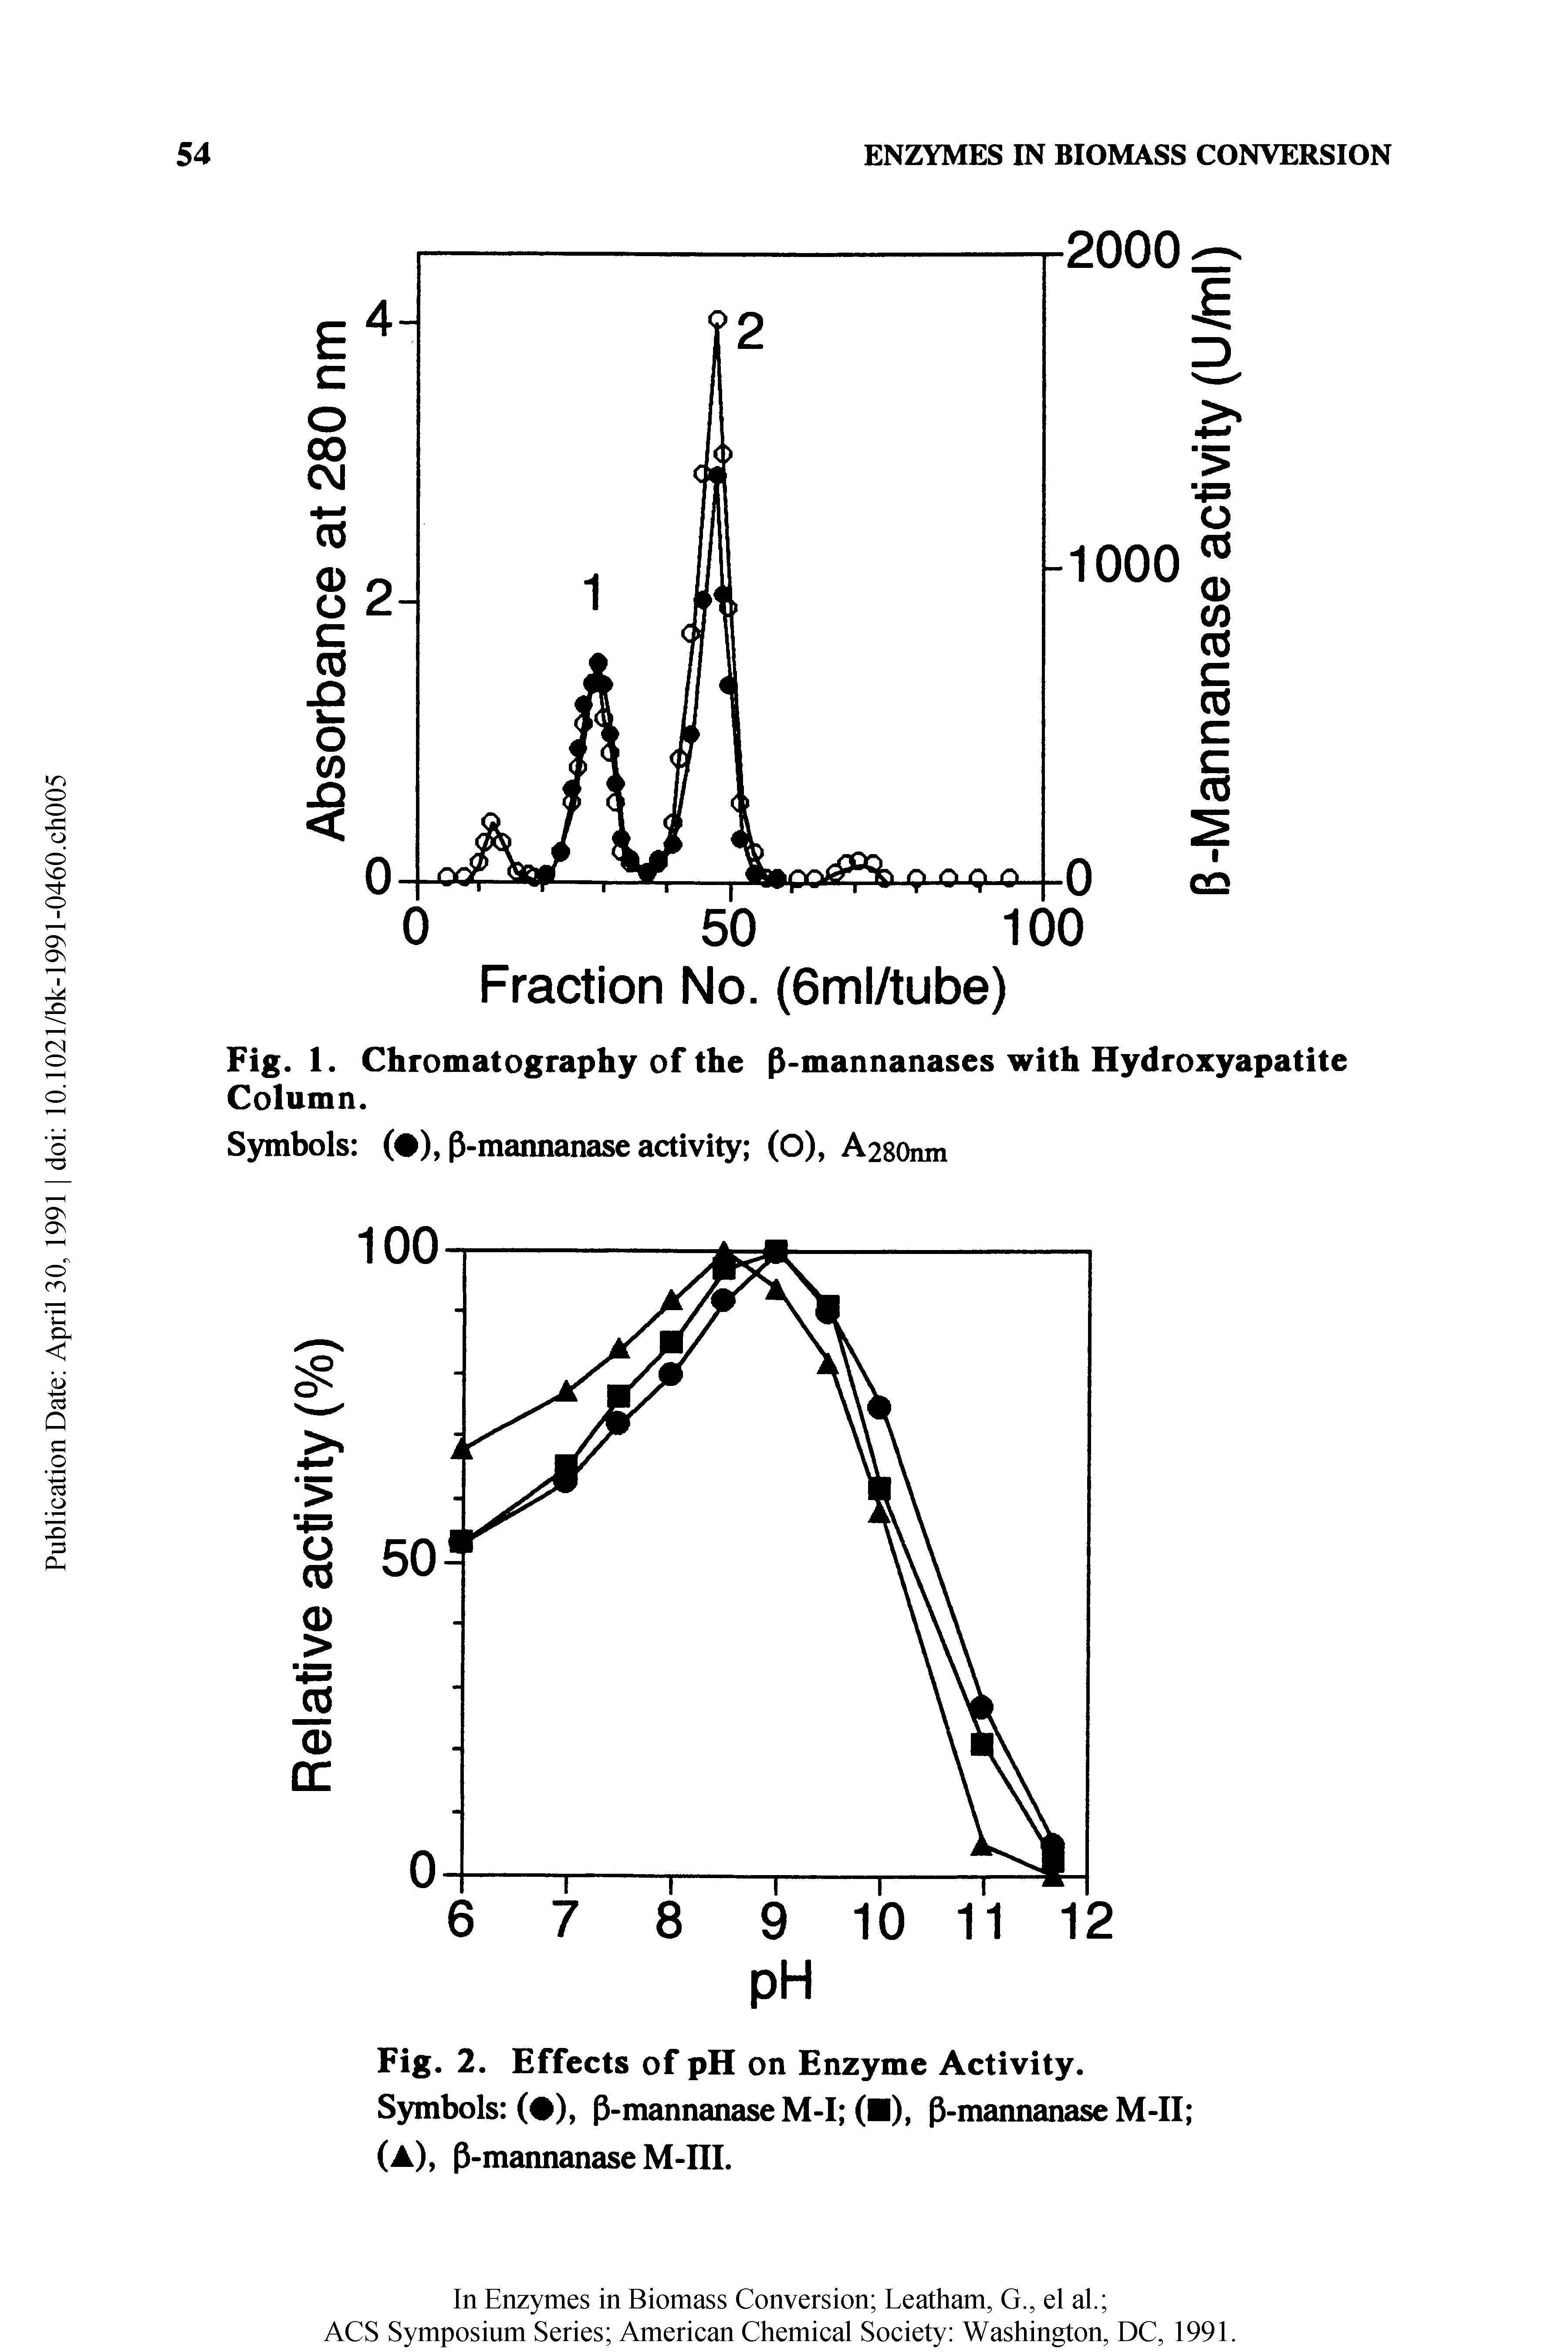 Fig. 2. Effects of pH on Enzyme Activity. Symbols ( ), P-mannanase M-I ( ), P-mannanase M-II (A), P-mannanase M-III.